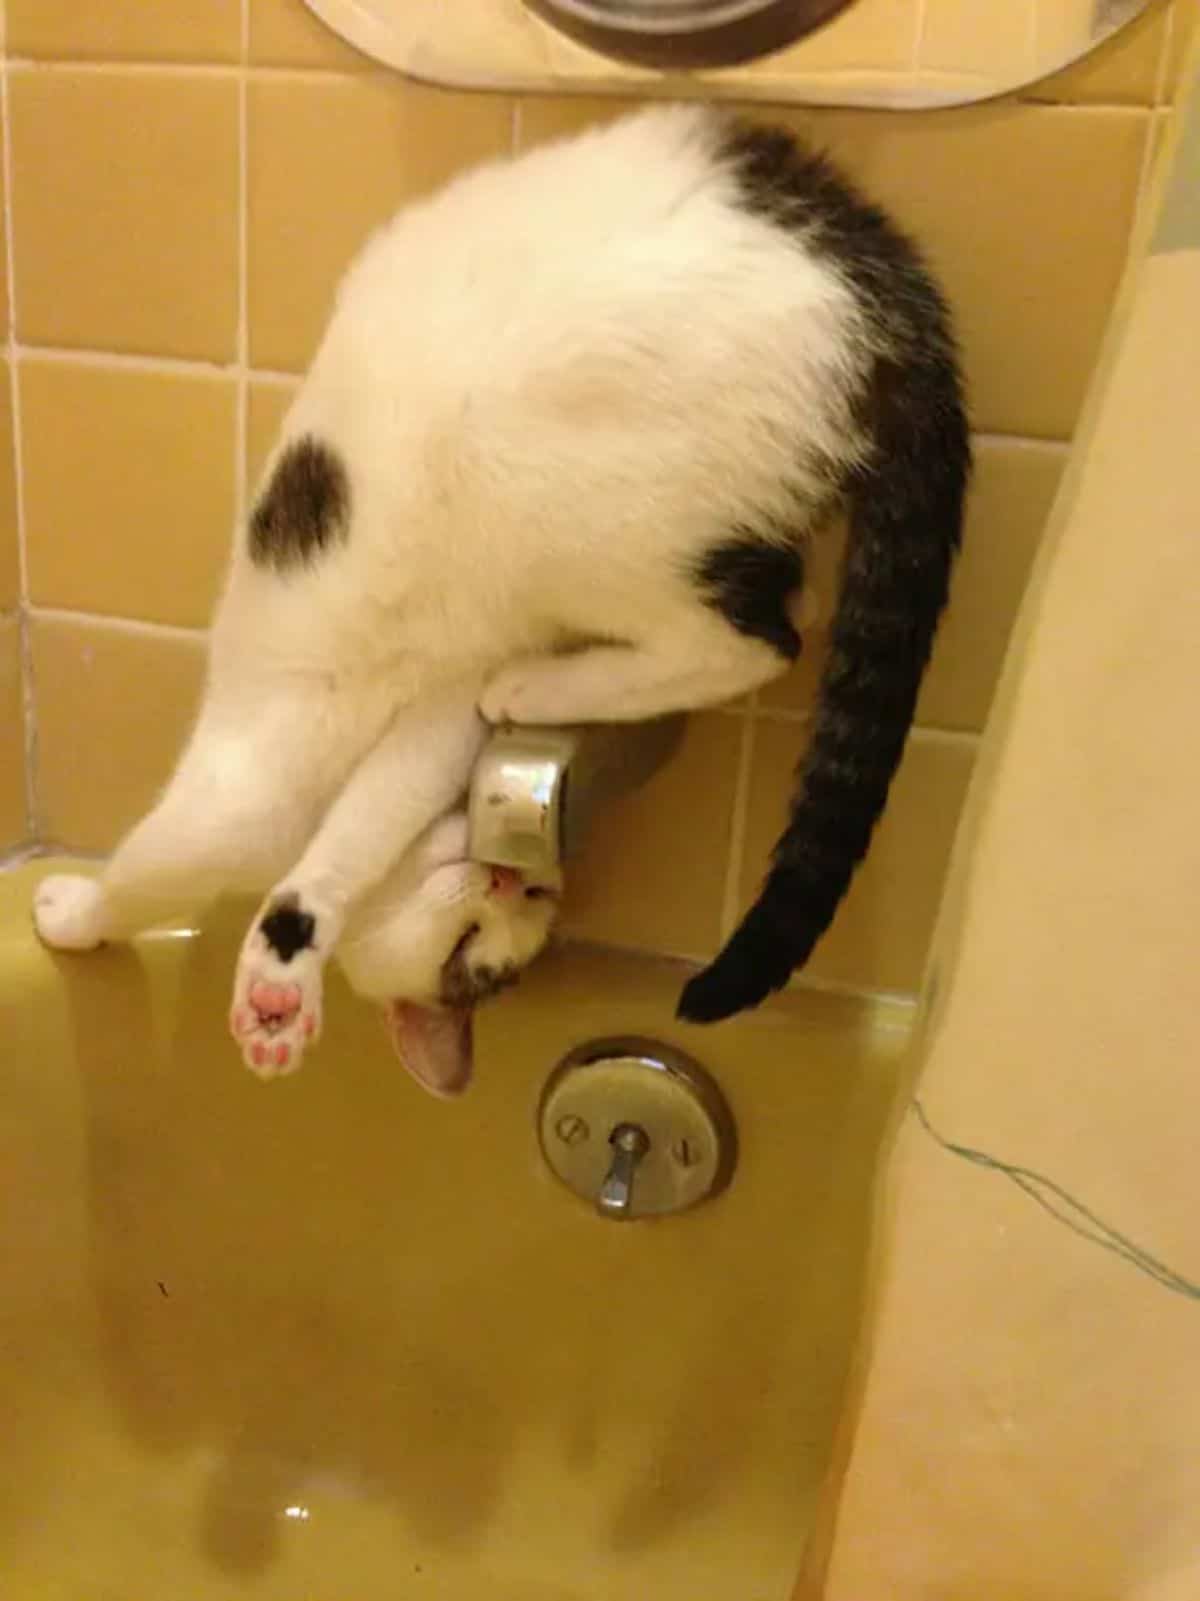 white and black cat standing contorted on a bathtub faucet